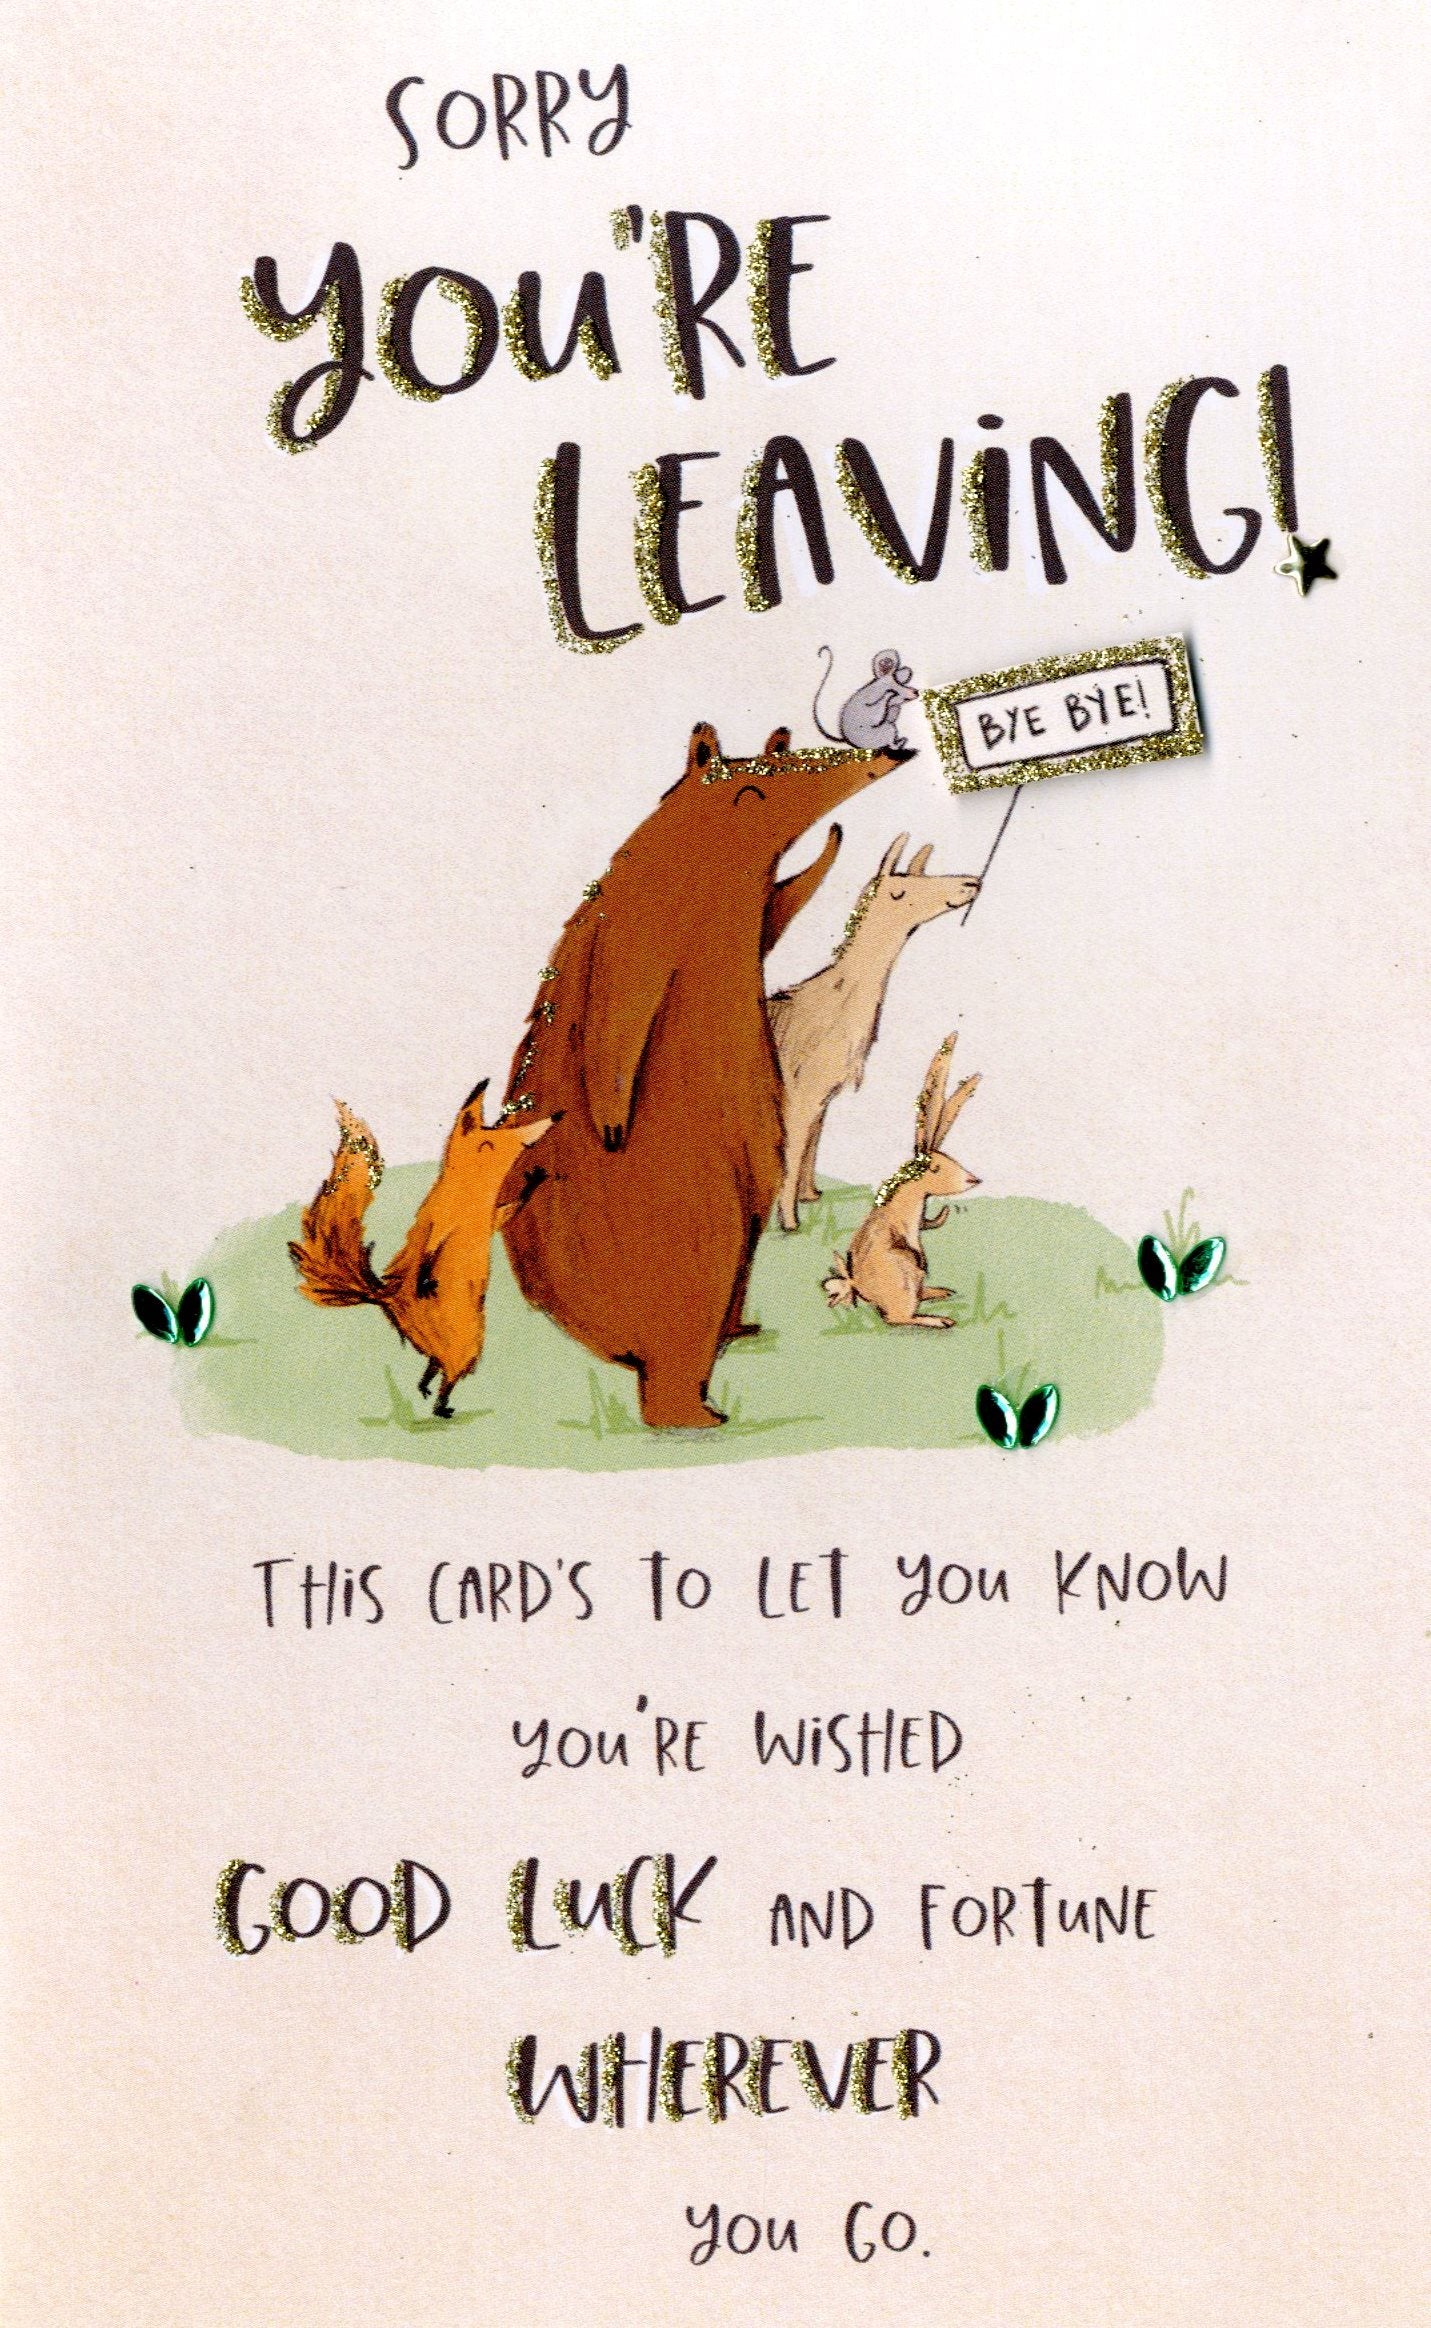 Sorry You're Leaving Embellished Leaving Greeting Card